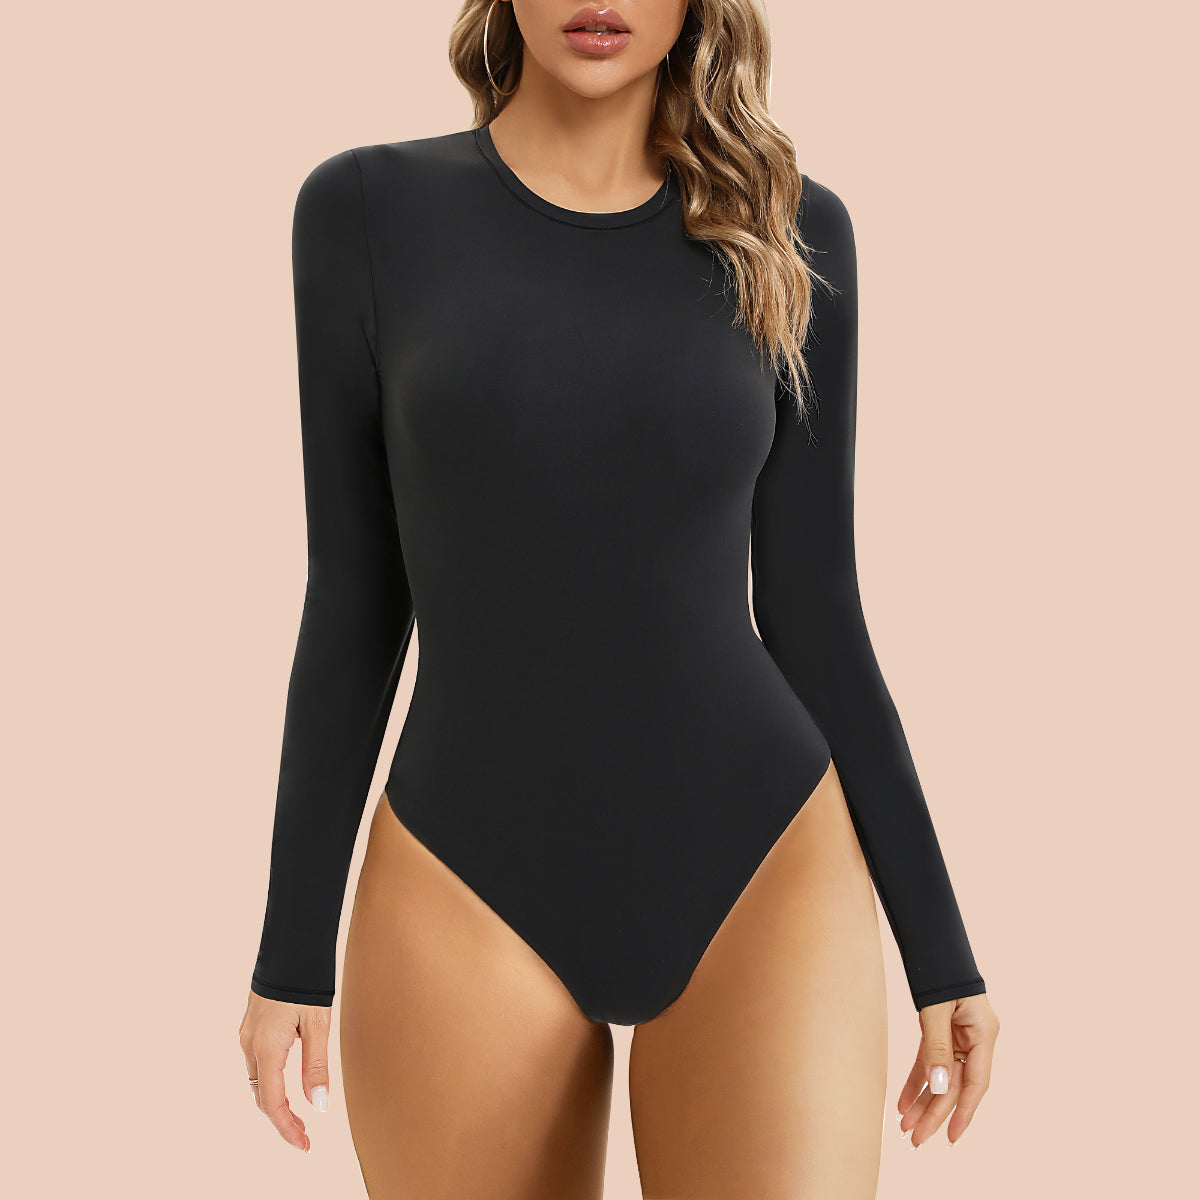 SHAPERX Women's Fit Everybody Bodysuit Soft Crew Neck T-shirt Body Suits  with Thong Design, SZ5249-Black-XS at  Women's Clothing store